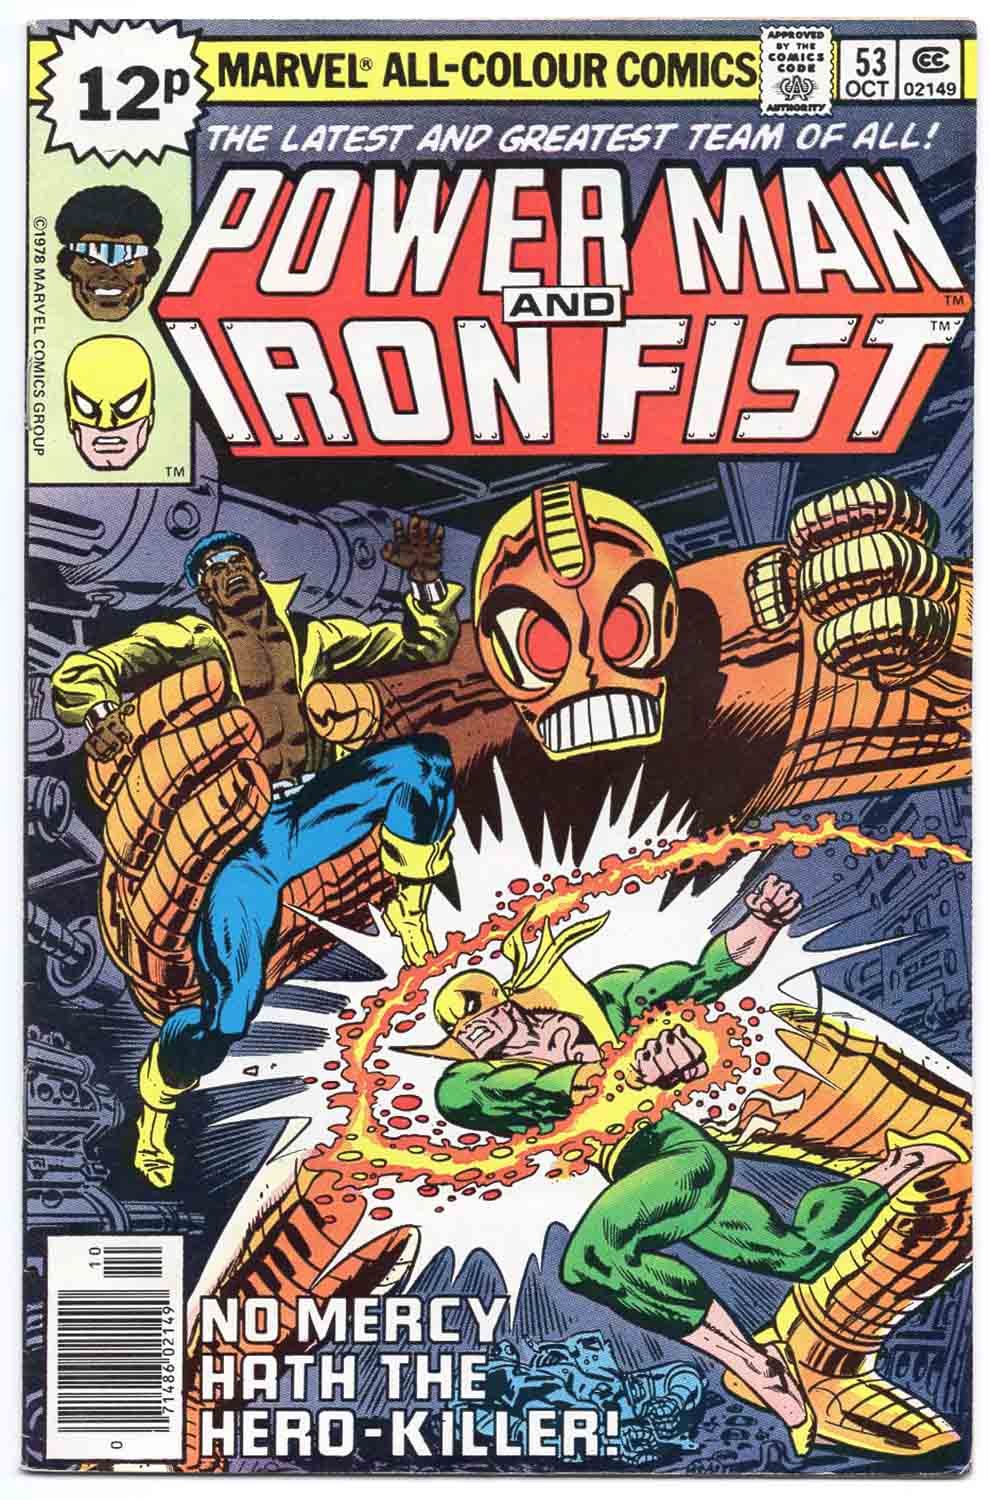 Power Man and Iron Fist #53